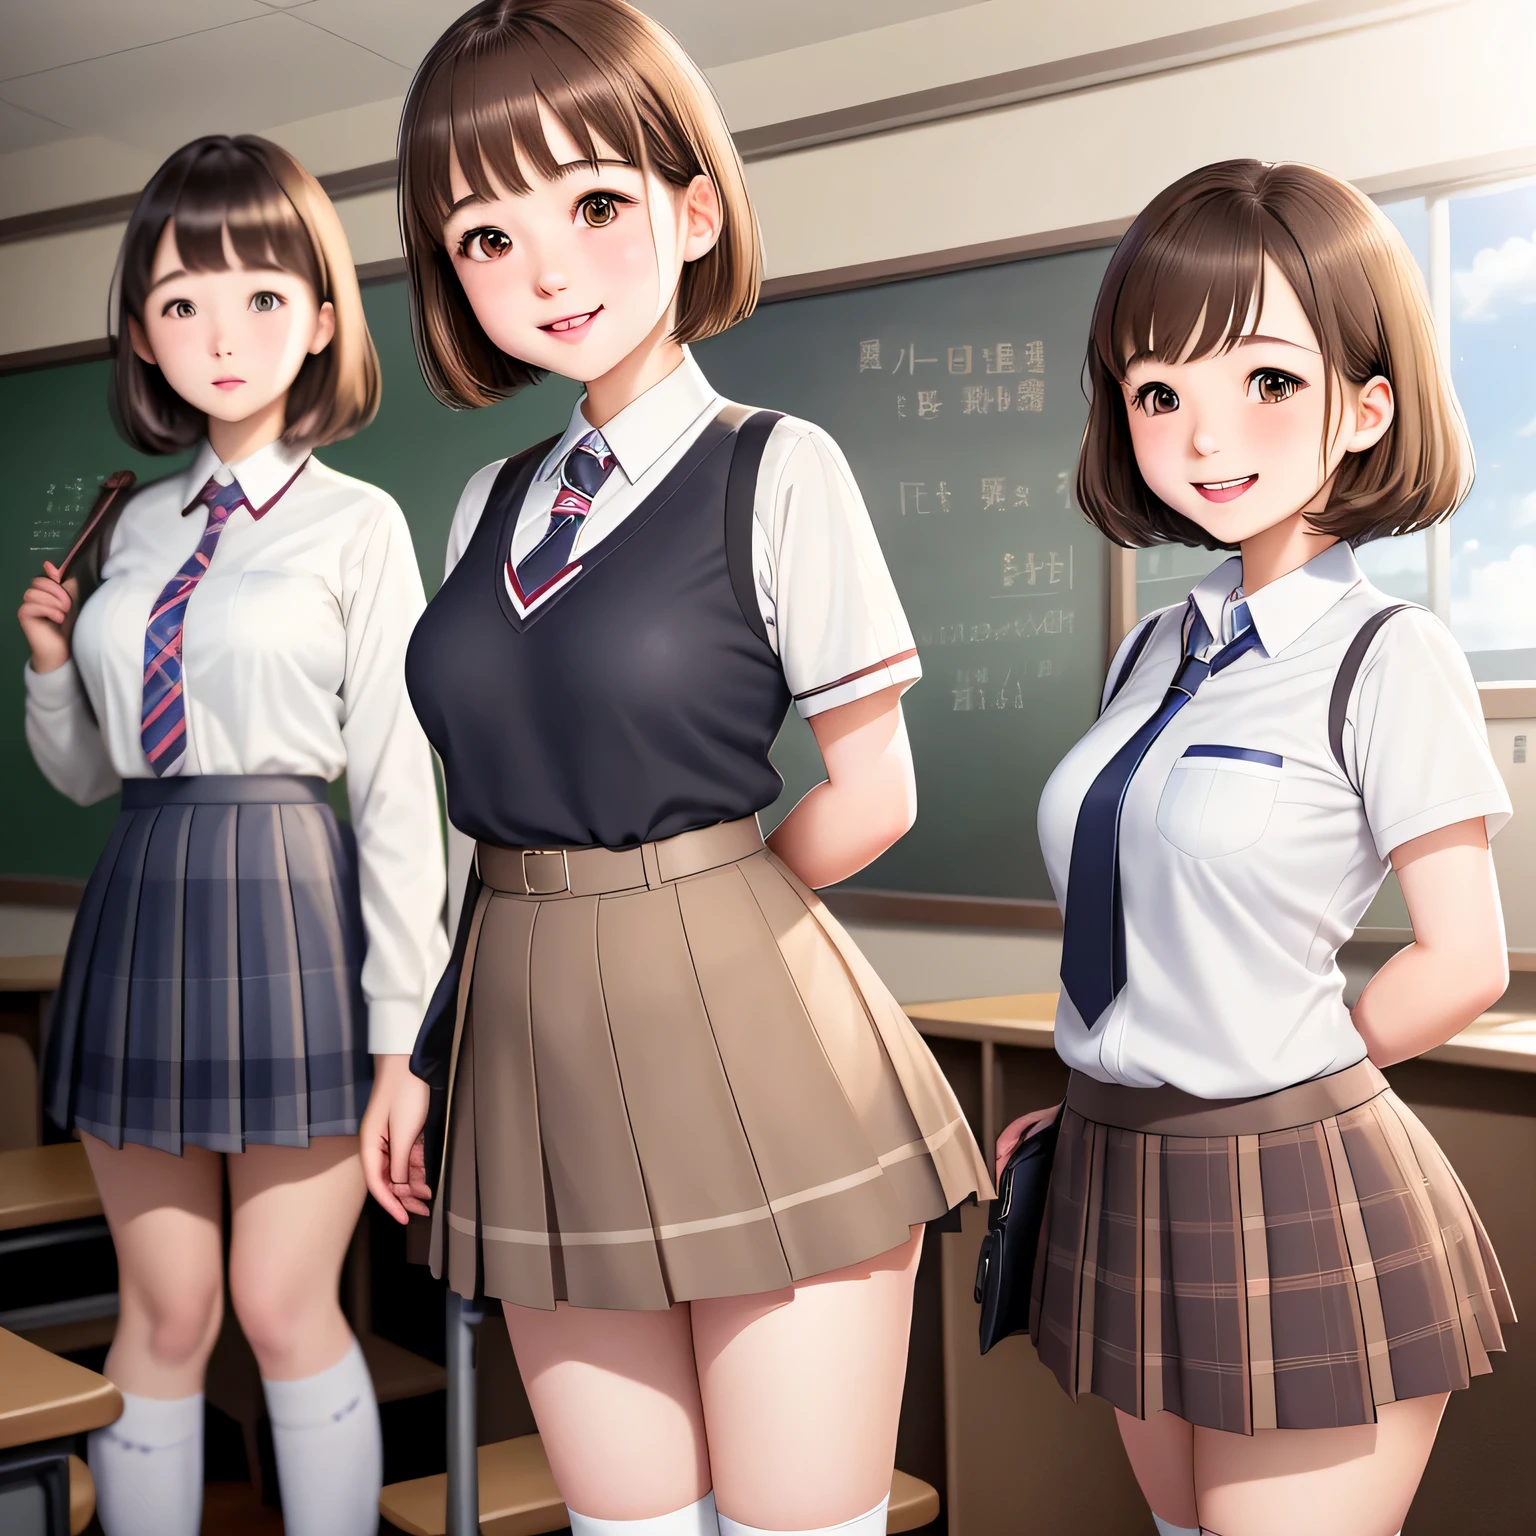 uniform、knee high socks、brown hair、short hair、cute face、classroom、girls high school uniform、Commemorative photo with four high school girls、tight uniform、plaid skirt、white shirt、tie、lady lady、smile、One person is shotgun、Rear view、one person looks back、embarrassed look、